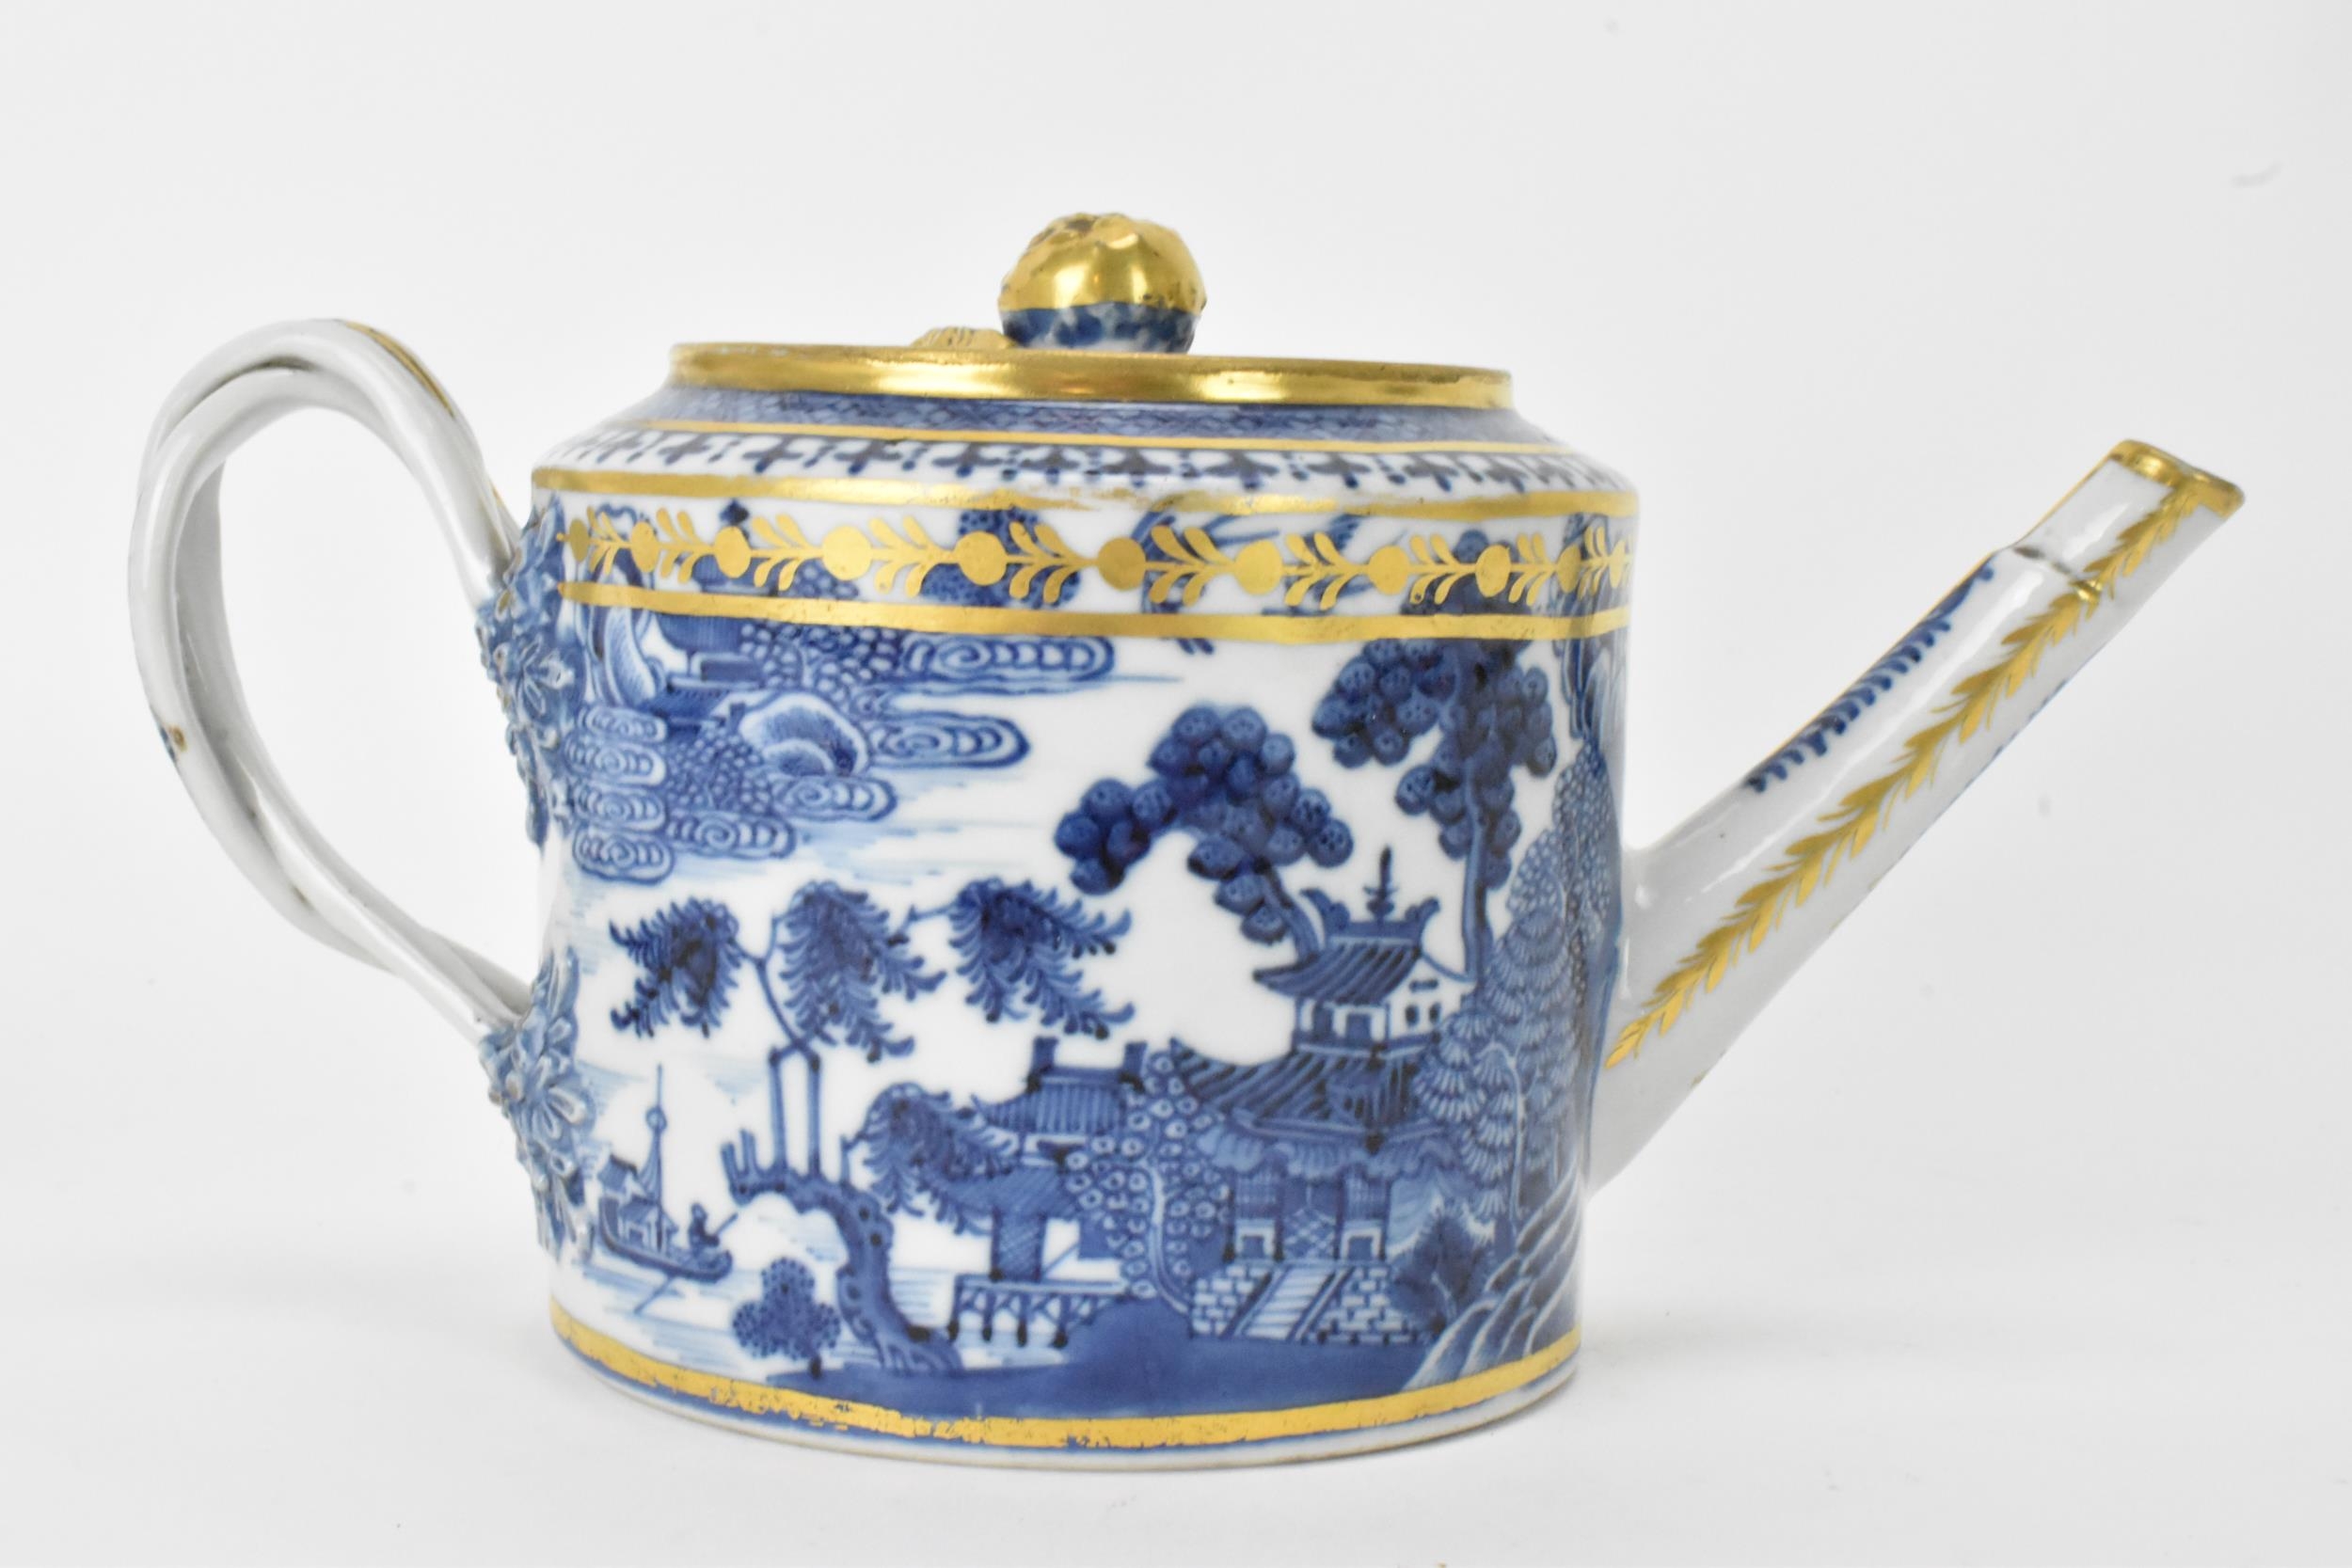 A Chinese export Qing dynasty blue and white teapot and stand, late 18th century, decorated with - Image 3 of 11